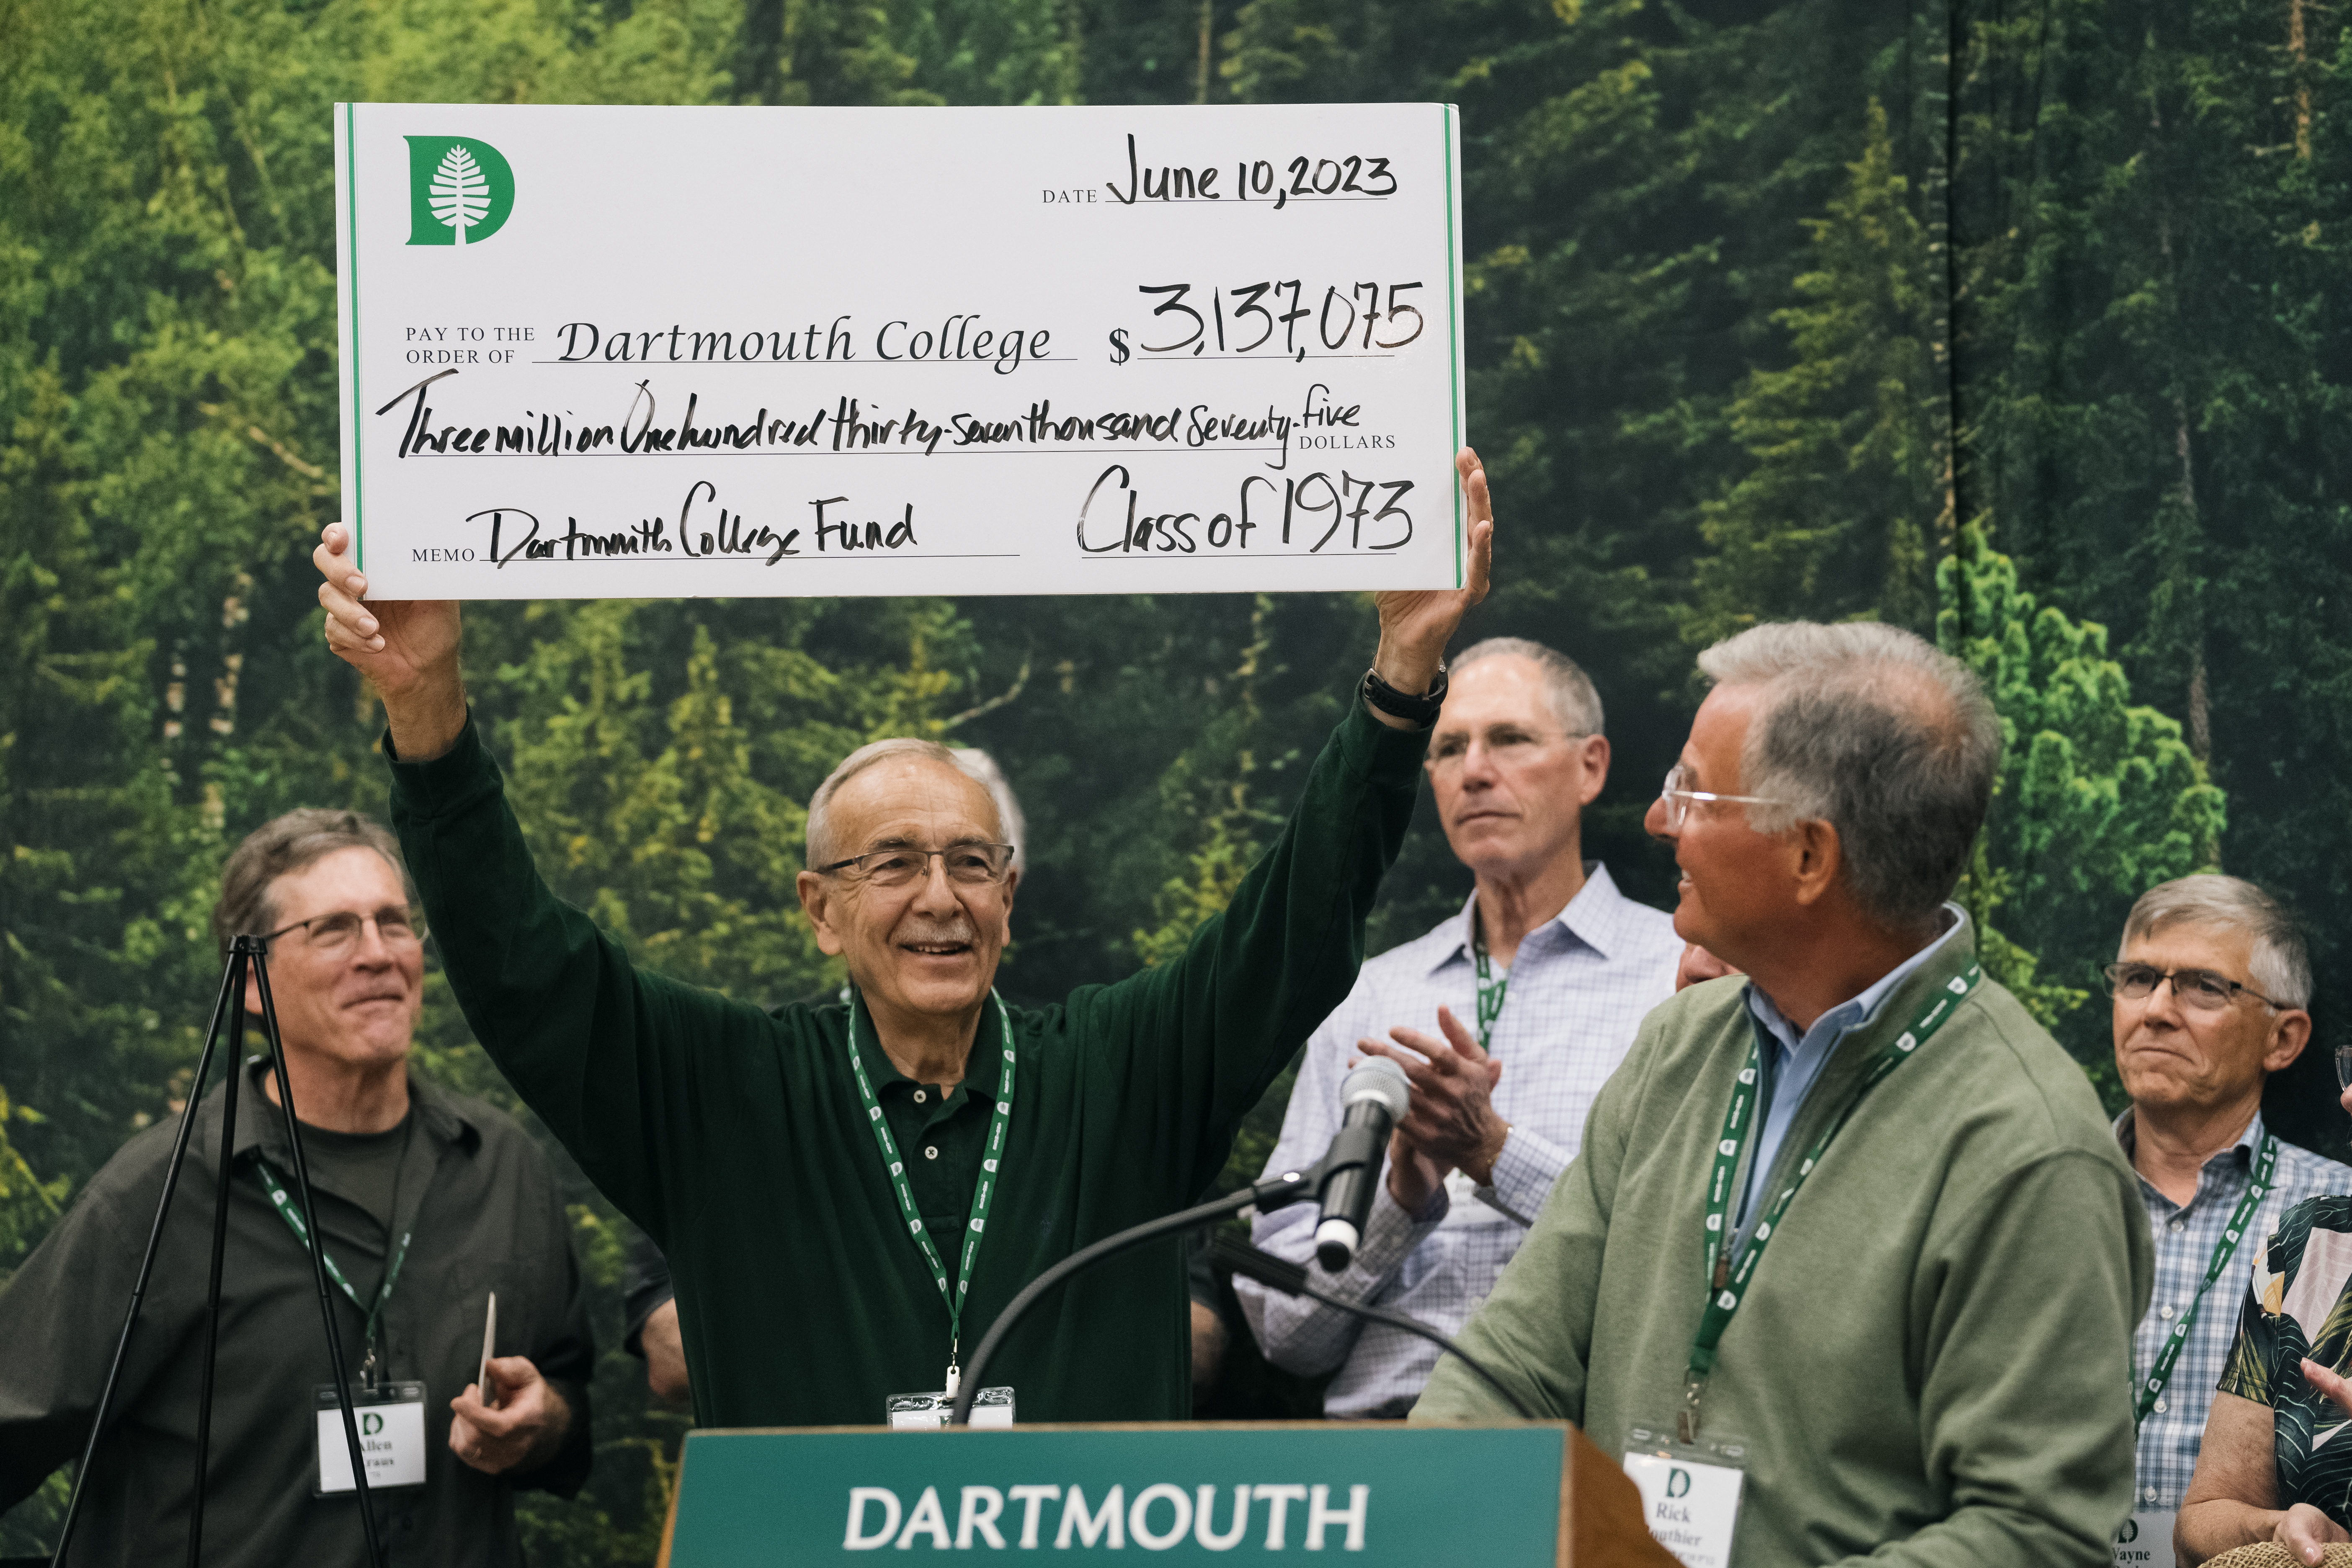 Member of ’73 holding up their giant check to the Dartmouth College Fund